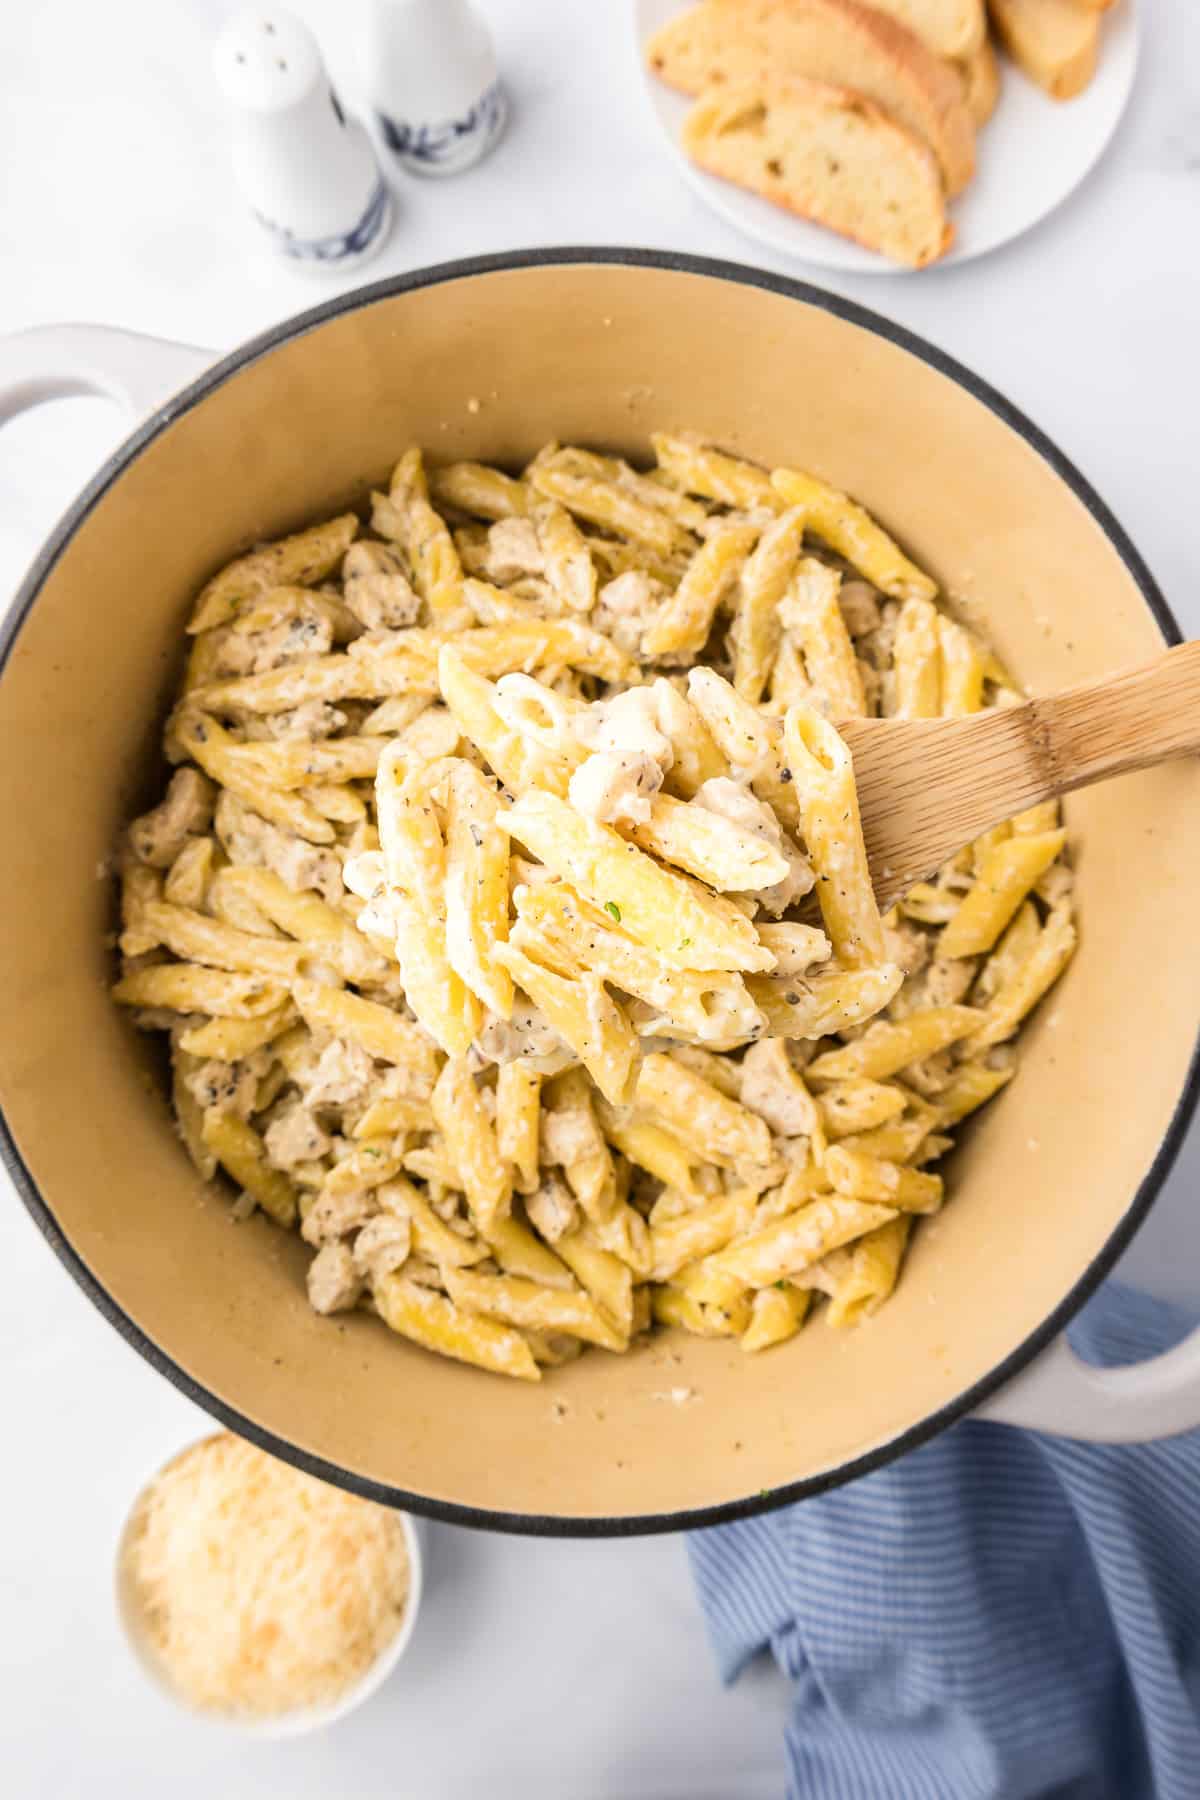 Chicken penne alfredo finished cooking in a pot from above.